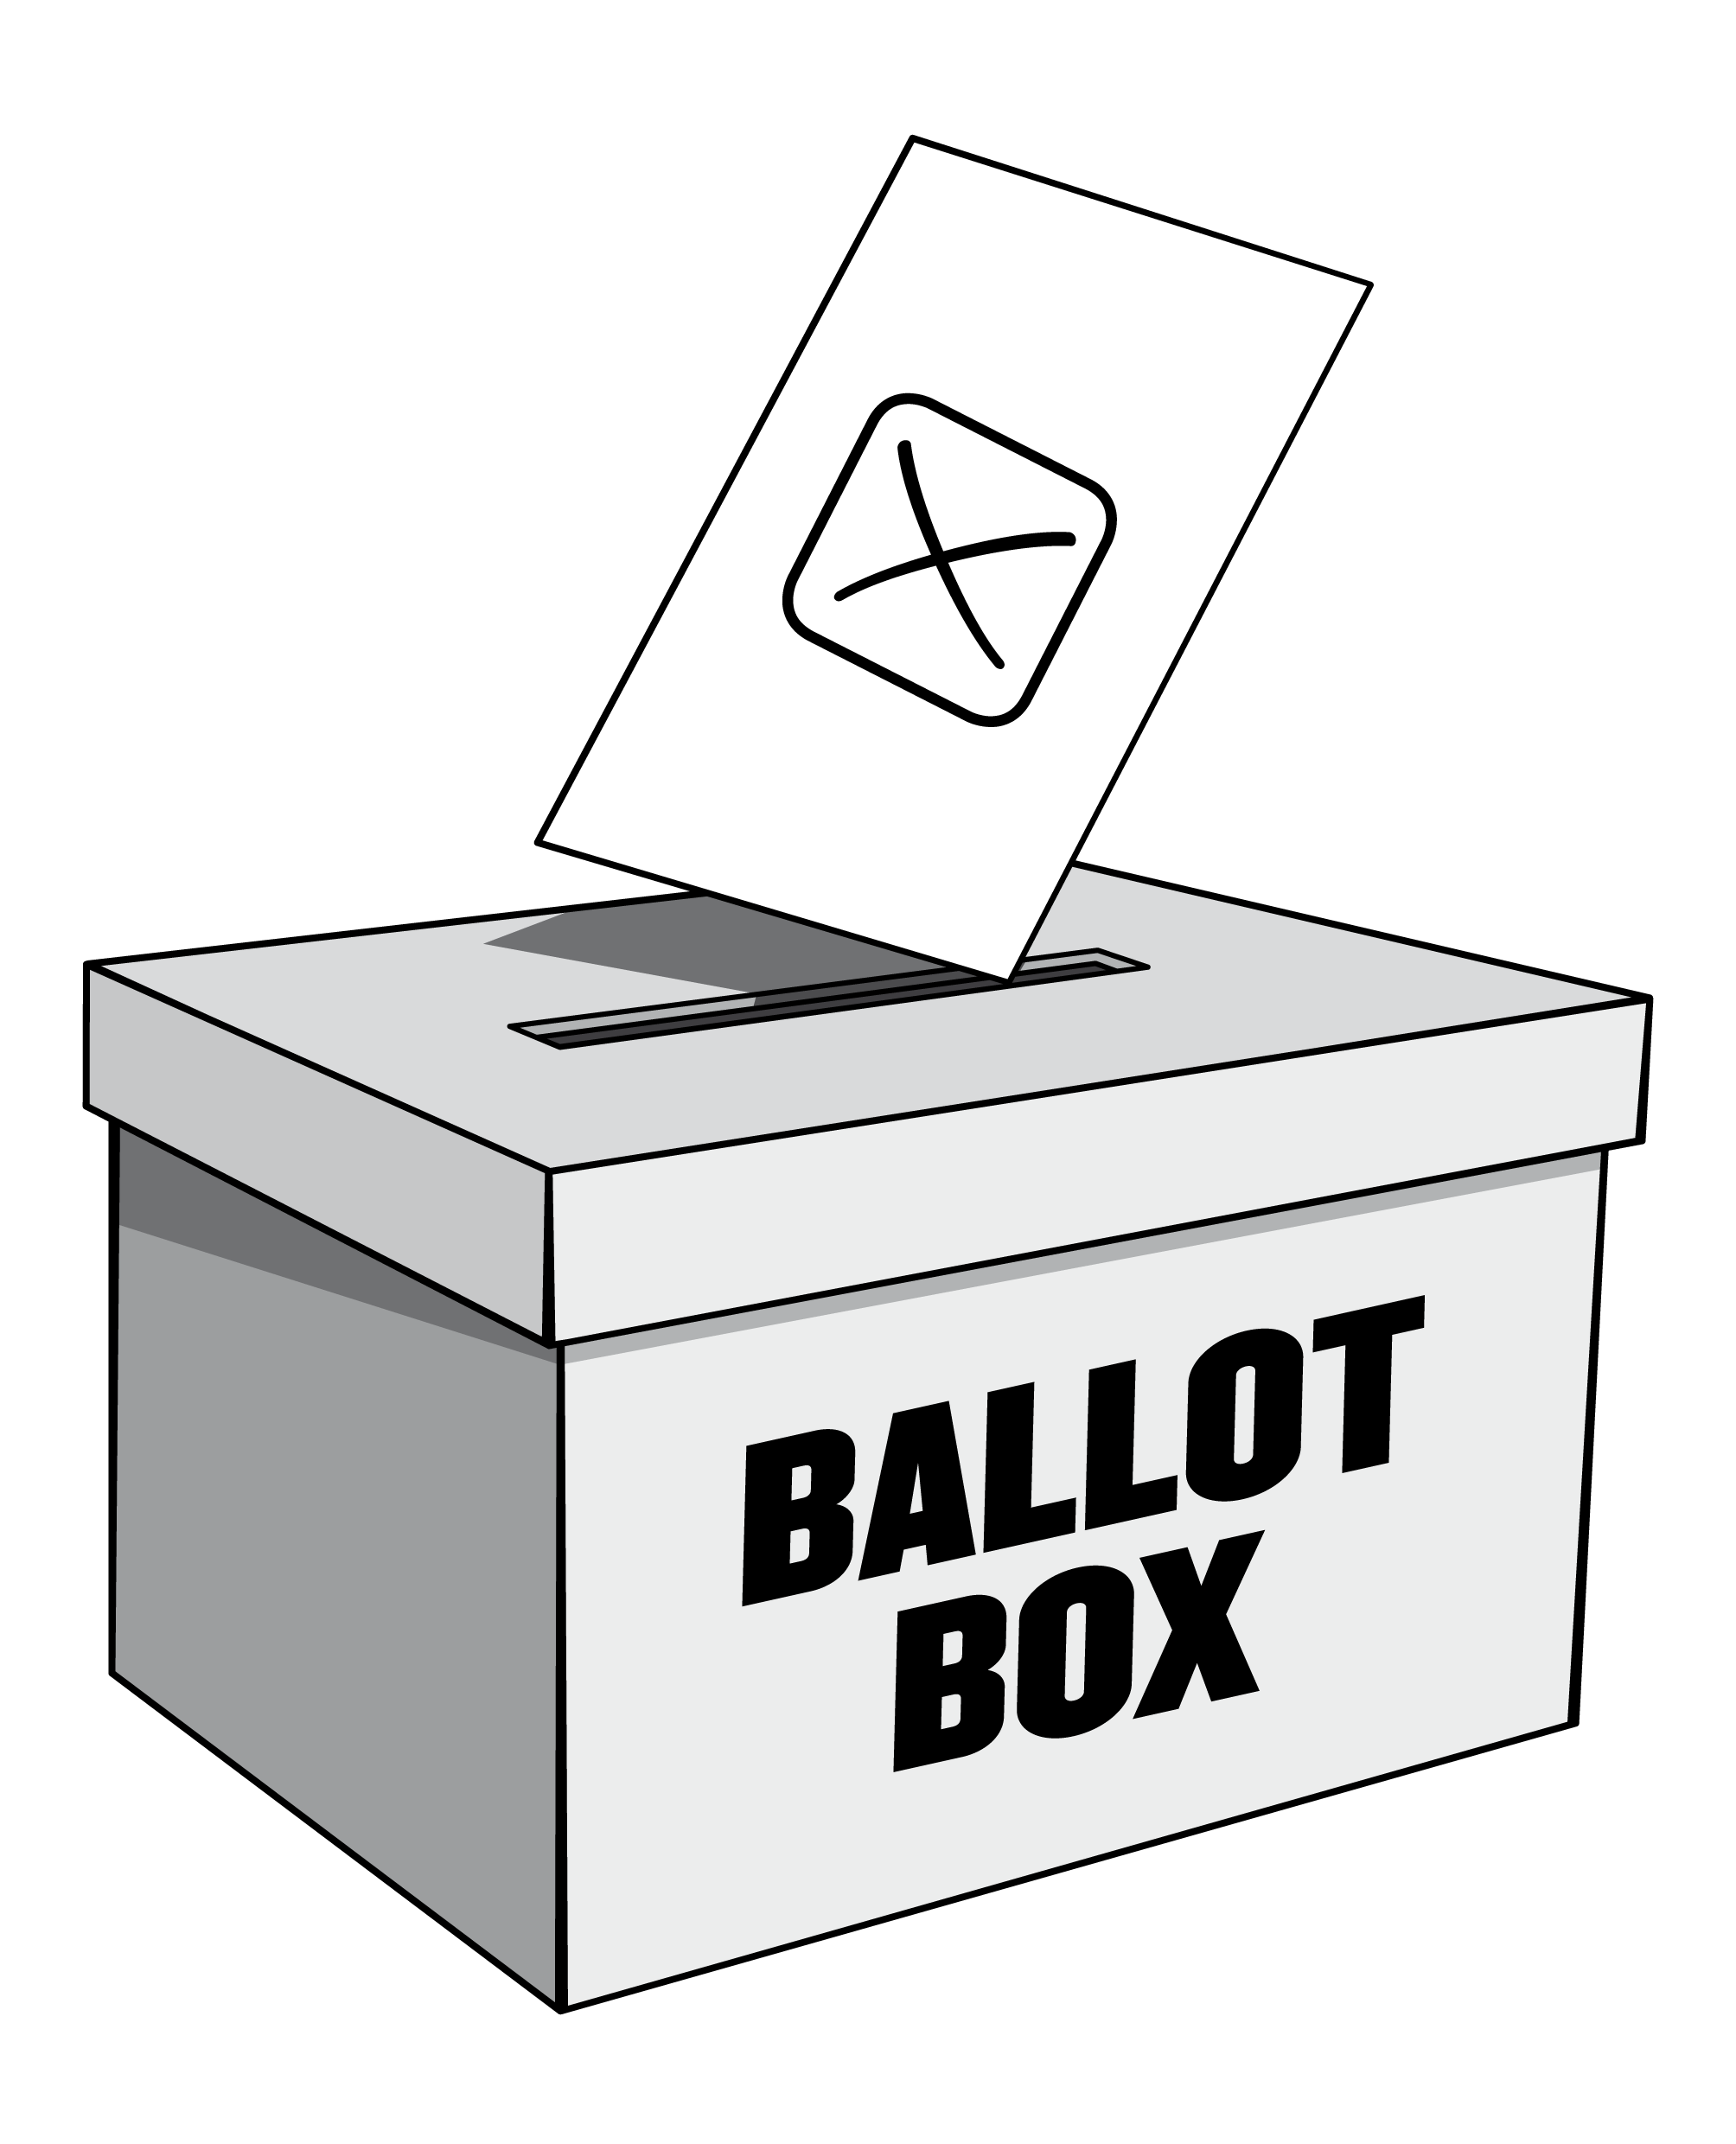 81871-box-area-brand-election-voting-ballot.png